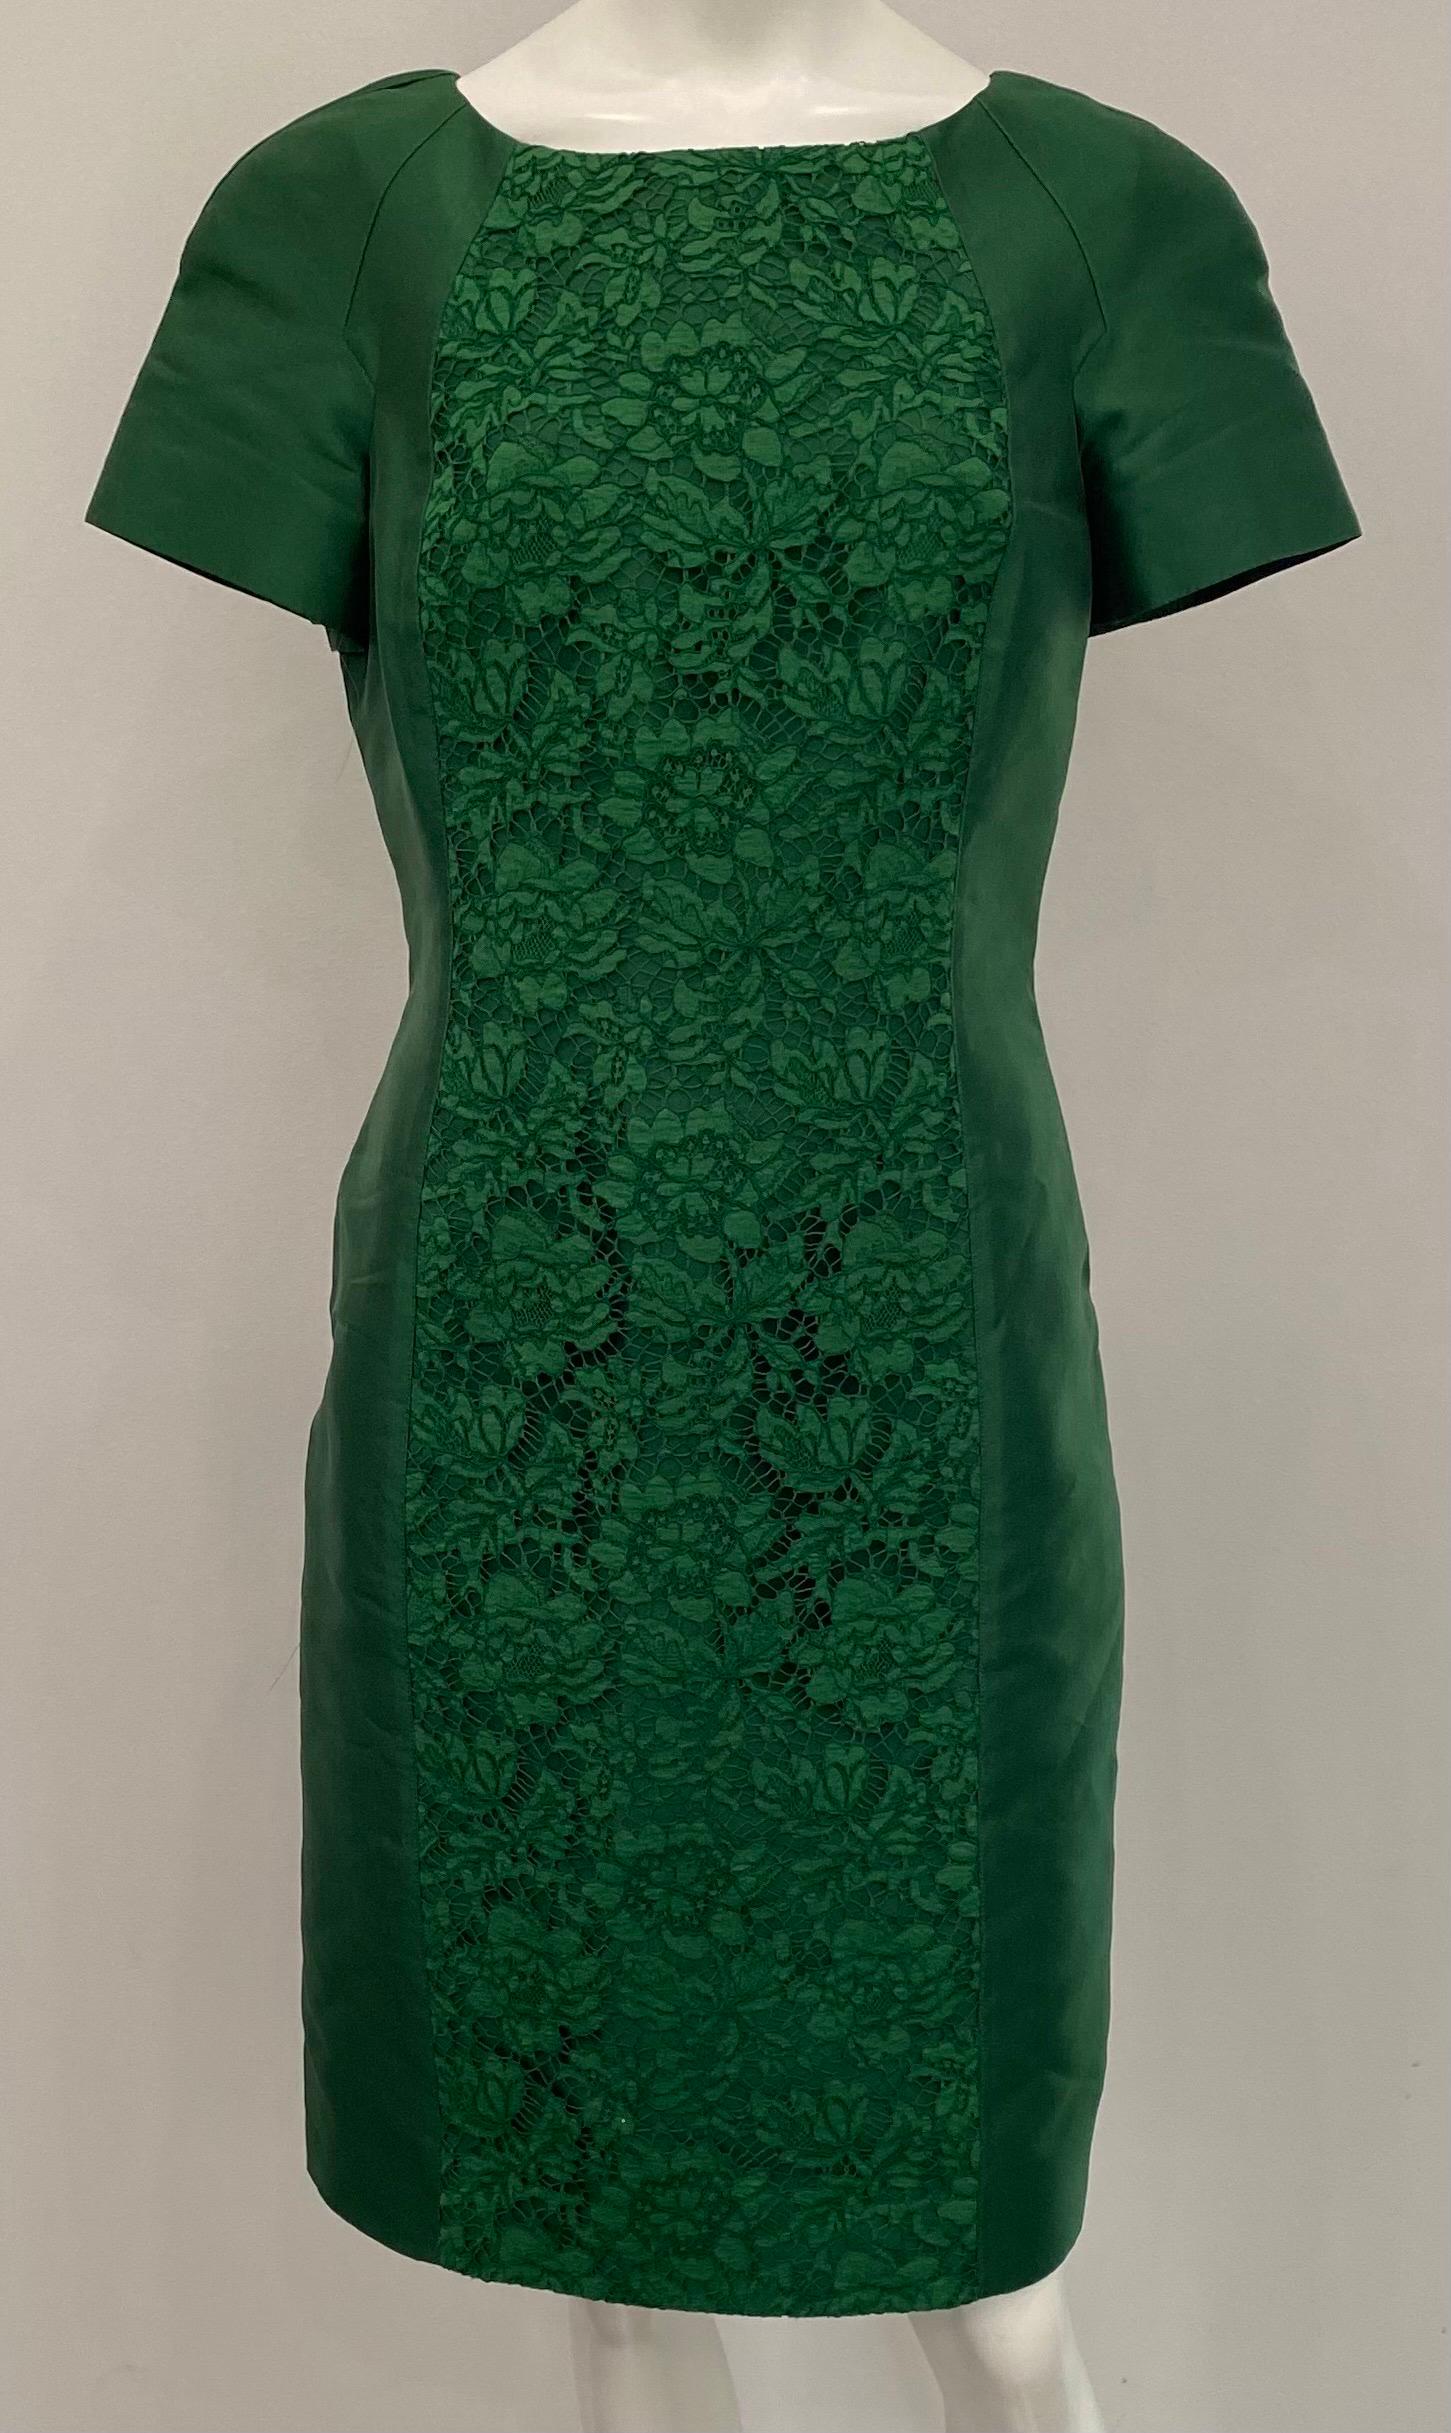 Valentino Emerald Green Silk and Lace Cap Sleeve Sheath Dress - Sz 8 This Sheath sytle silk dress is in a beautiful emerald green color with a lace insert panel along the front of the dress. The dress has a cap drop sleeve, scoop neckline, center